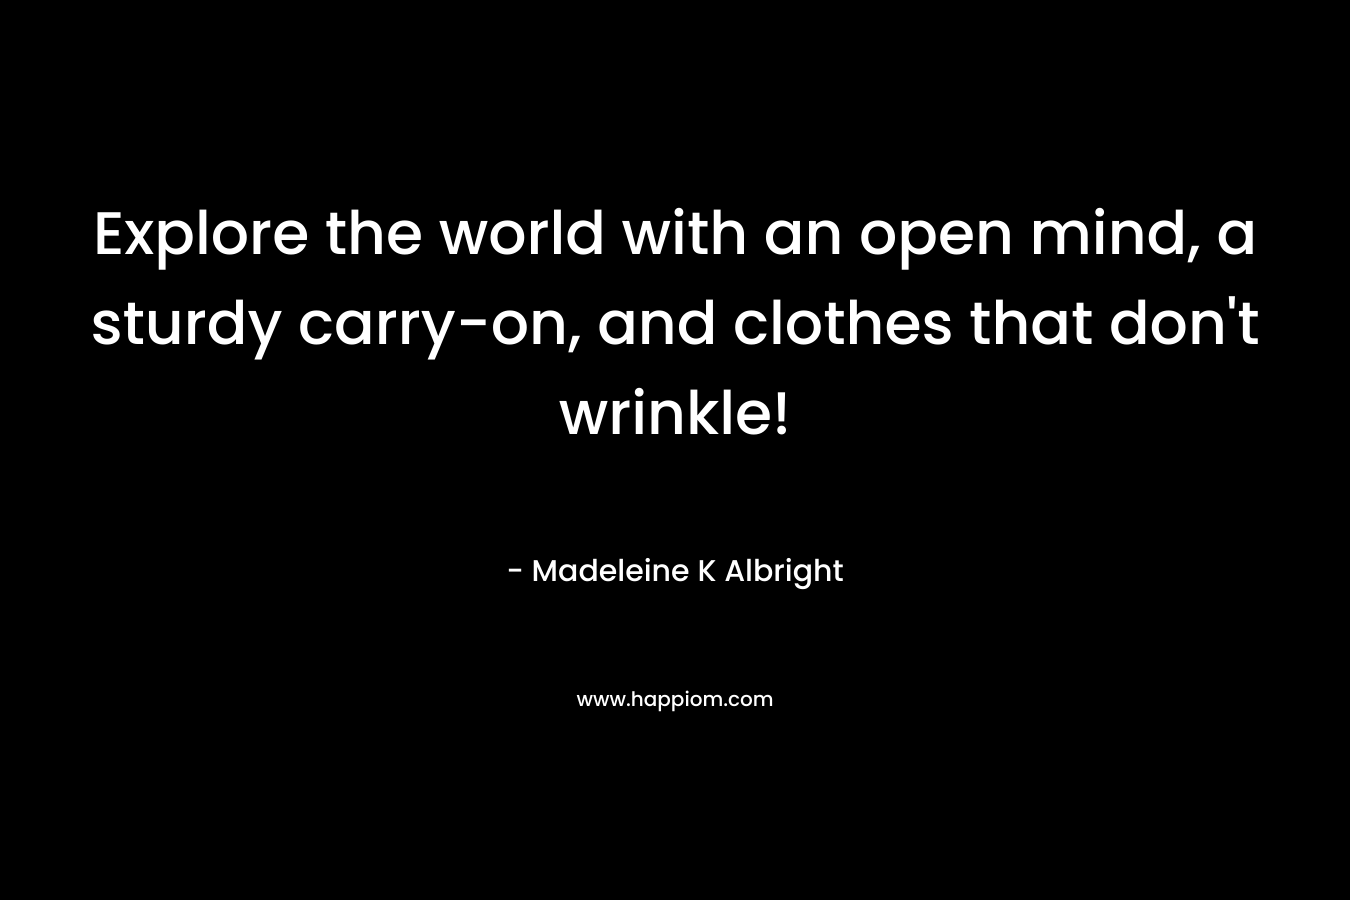 Explore the world with an open mind, a sturdy carry-on, and clothes that don't wrinkle!